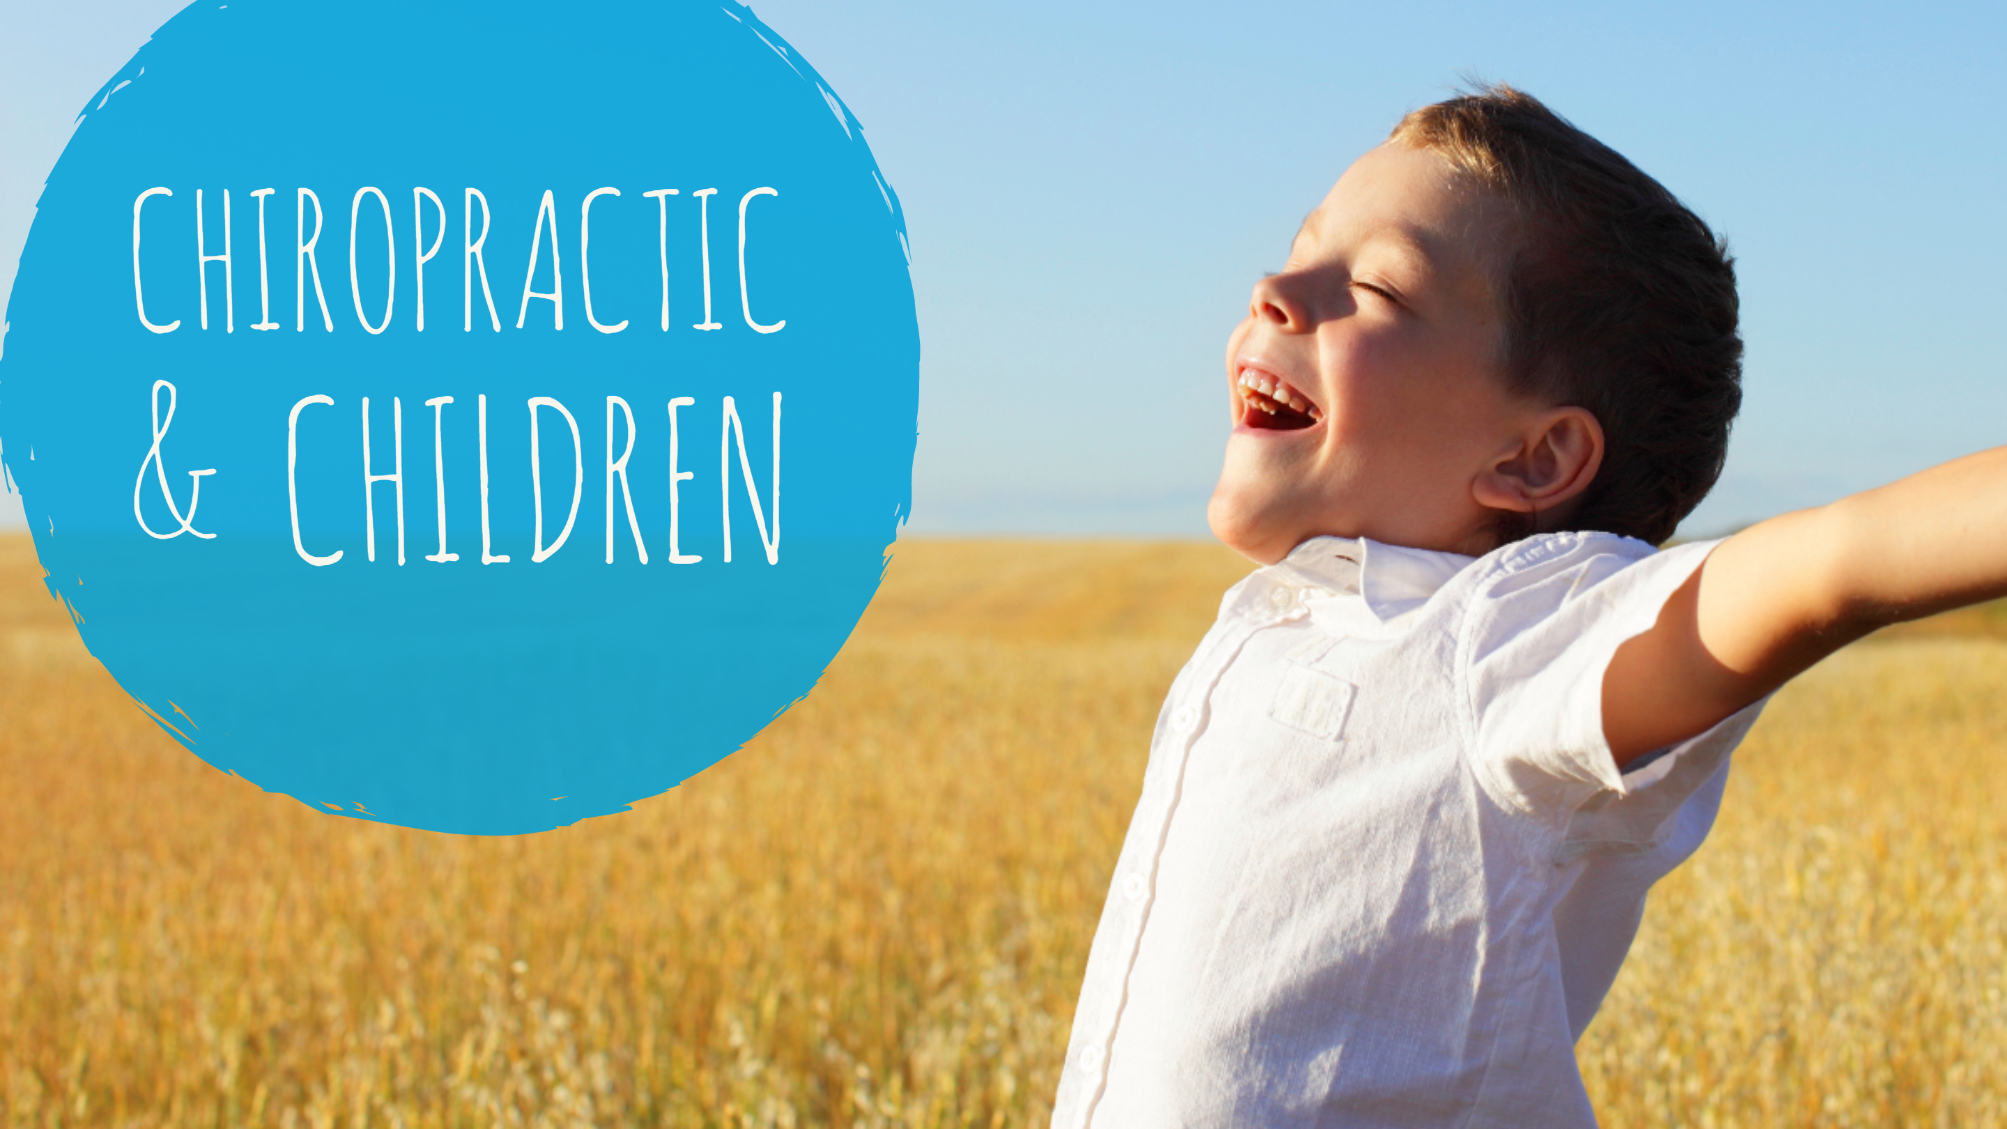 Chiropractic for Kids